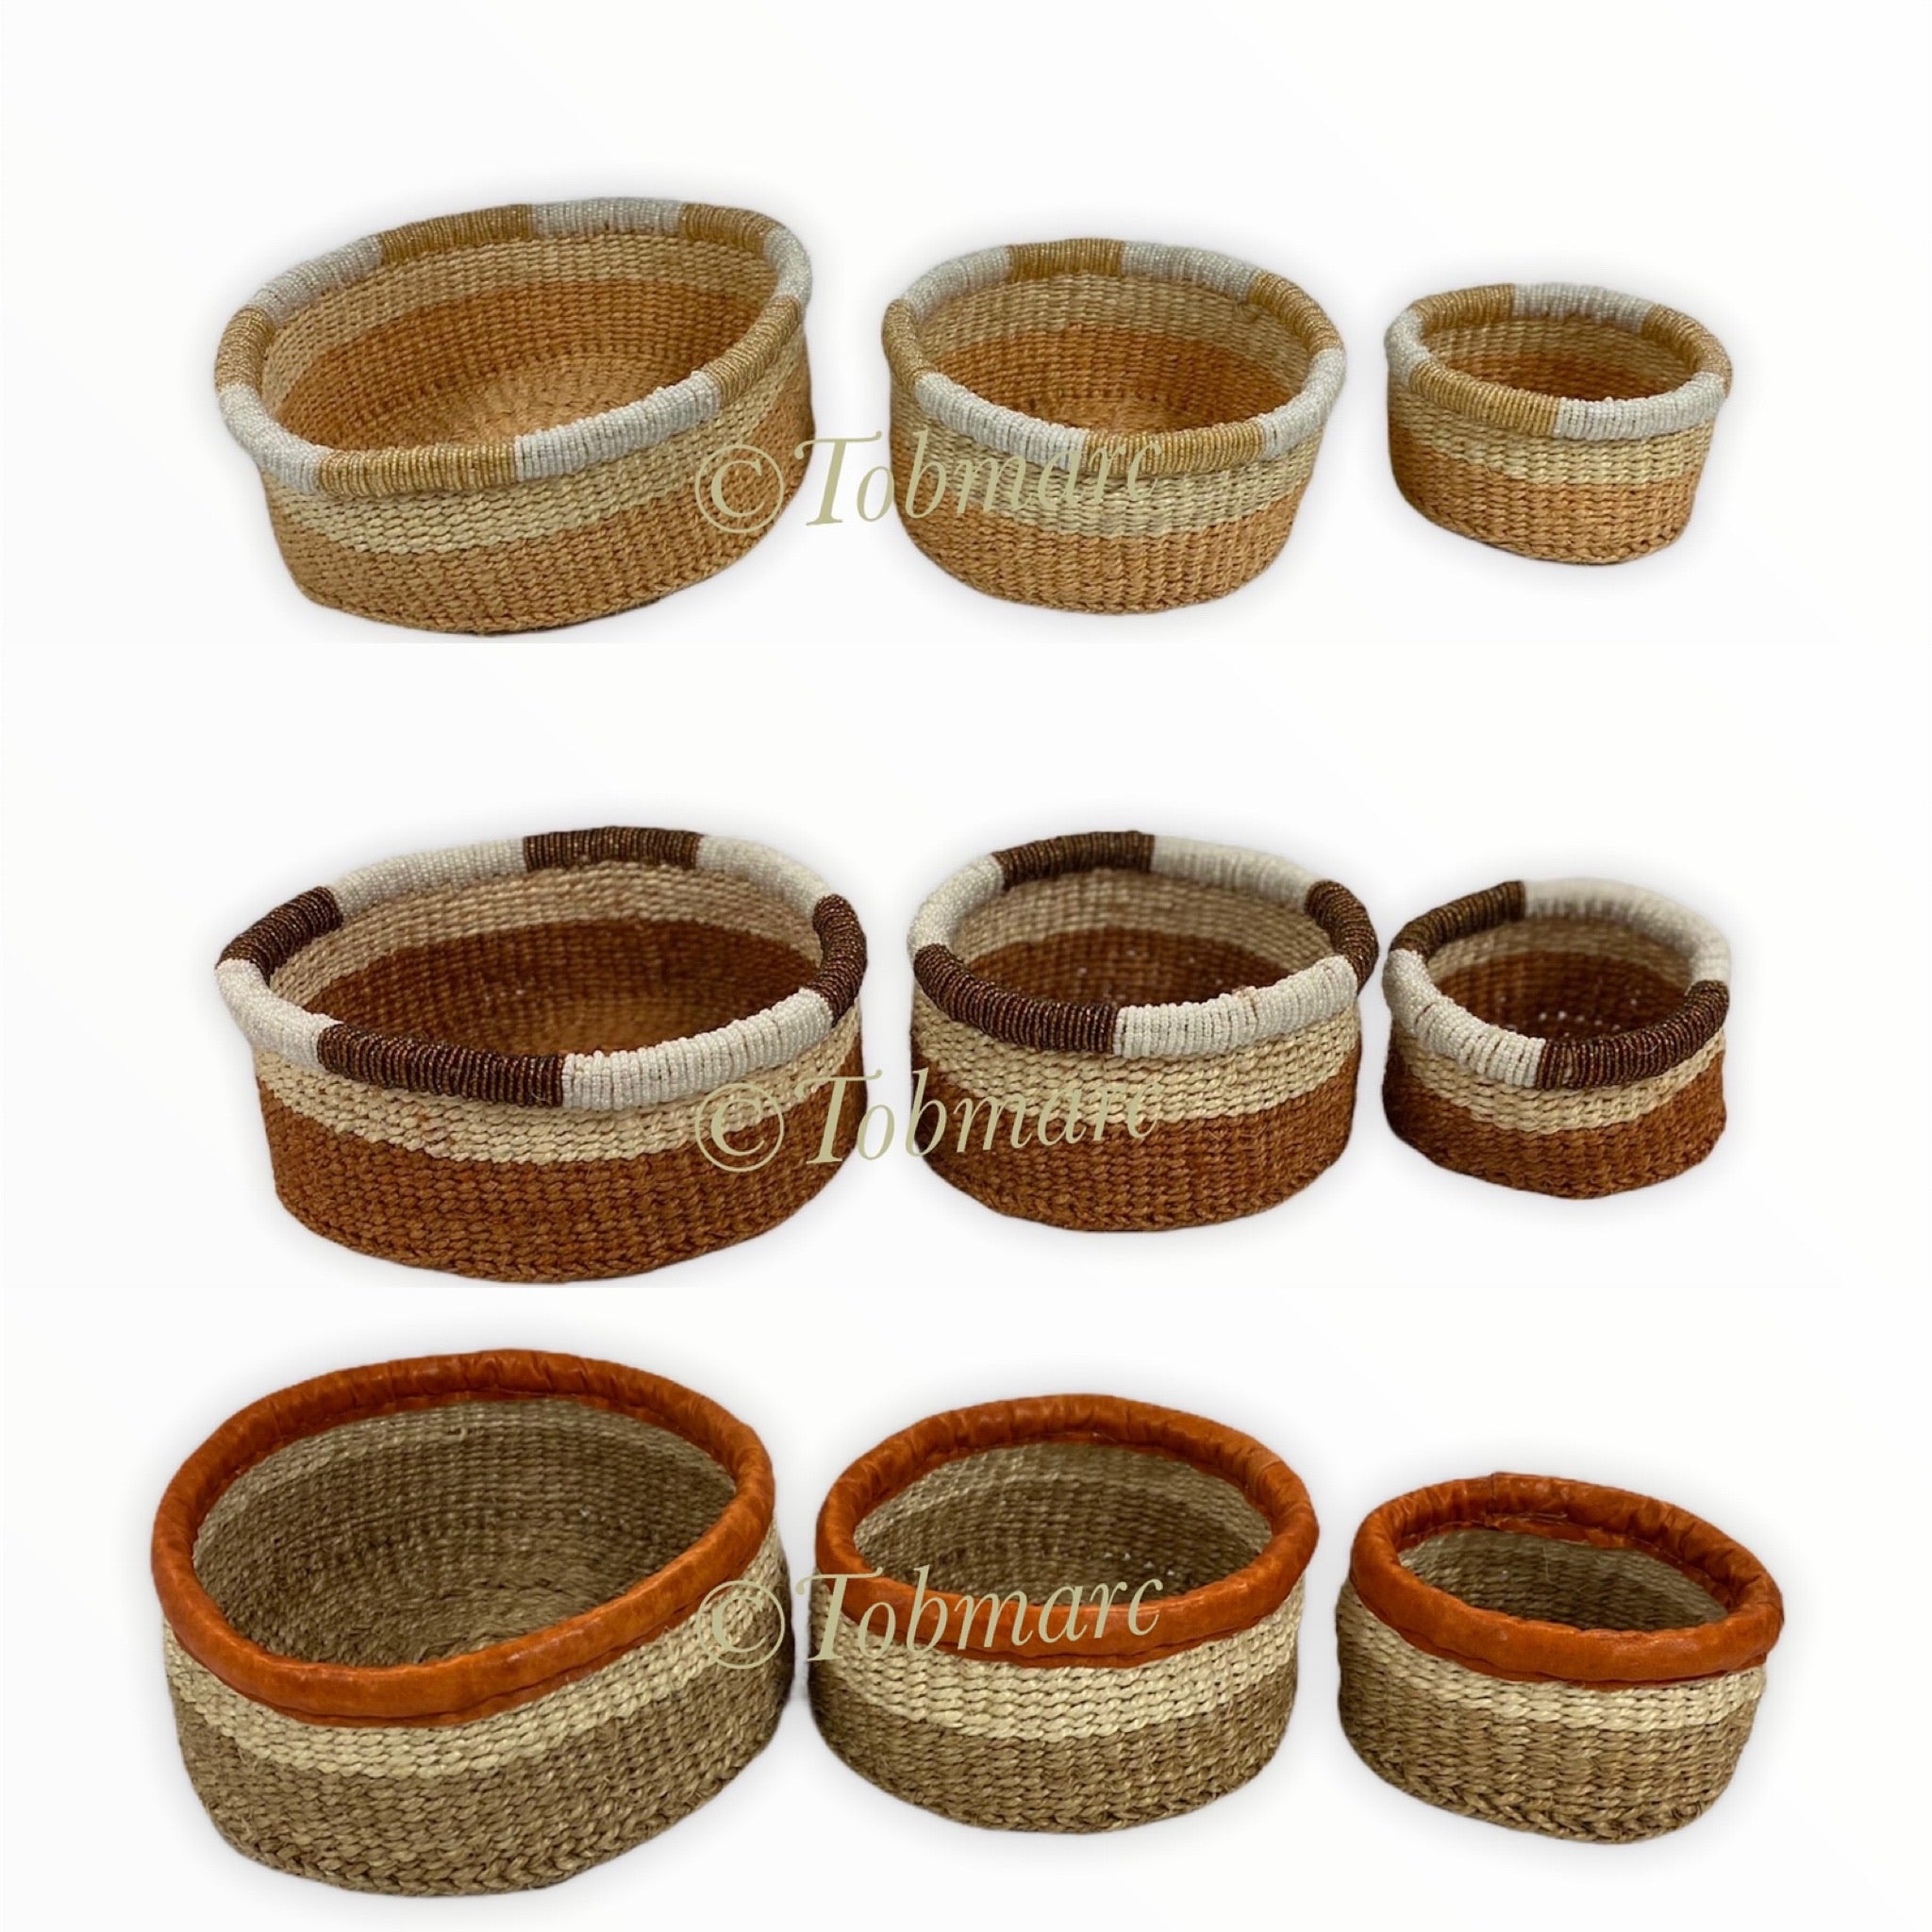 Nesting small basket|Jewelry holding baskets|Organizing Basket| Small Storage Baskets|Gift Baskets|Toys Baskets - Tobmarc Home Decor & Gifts 